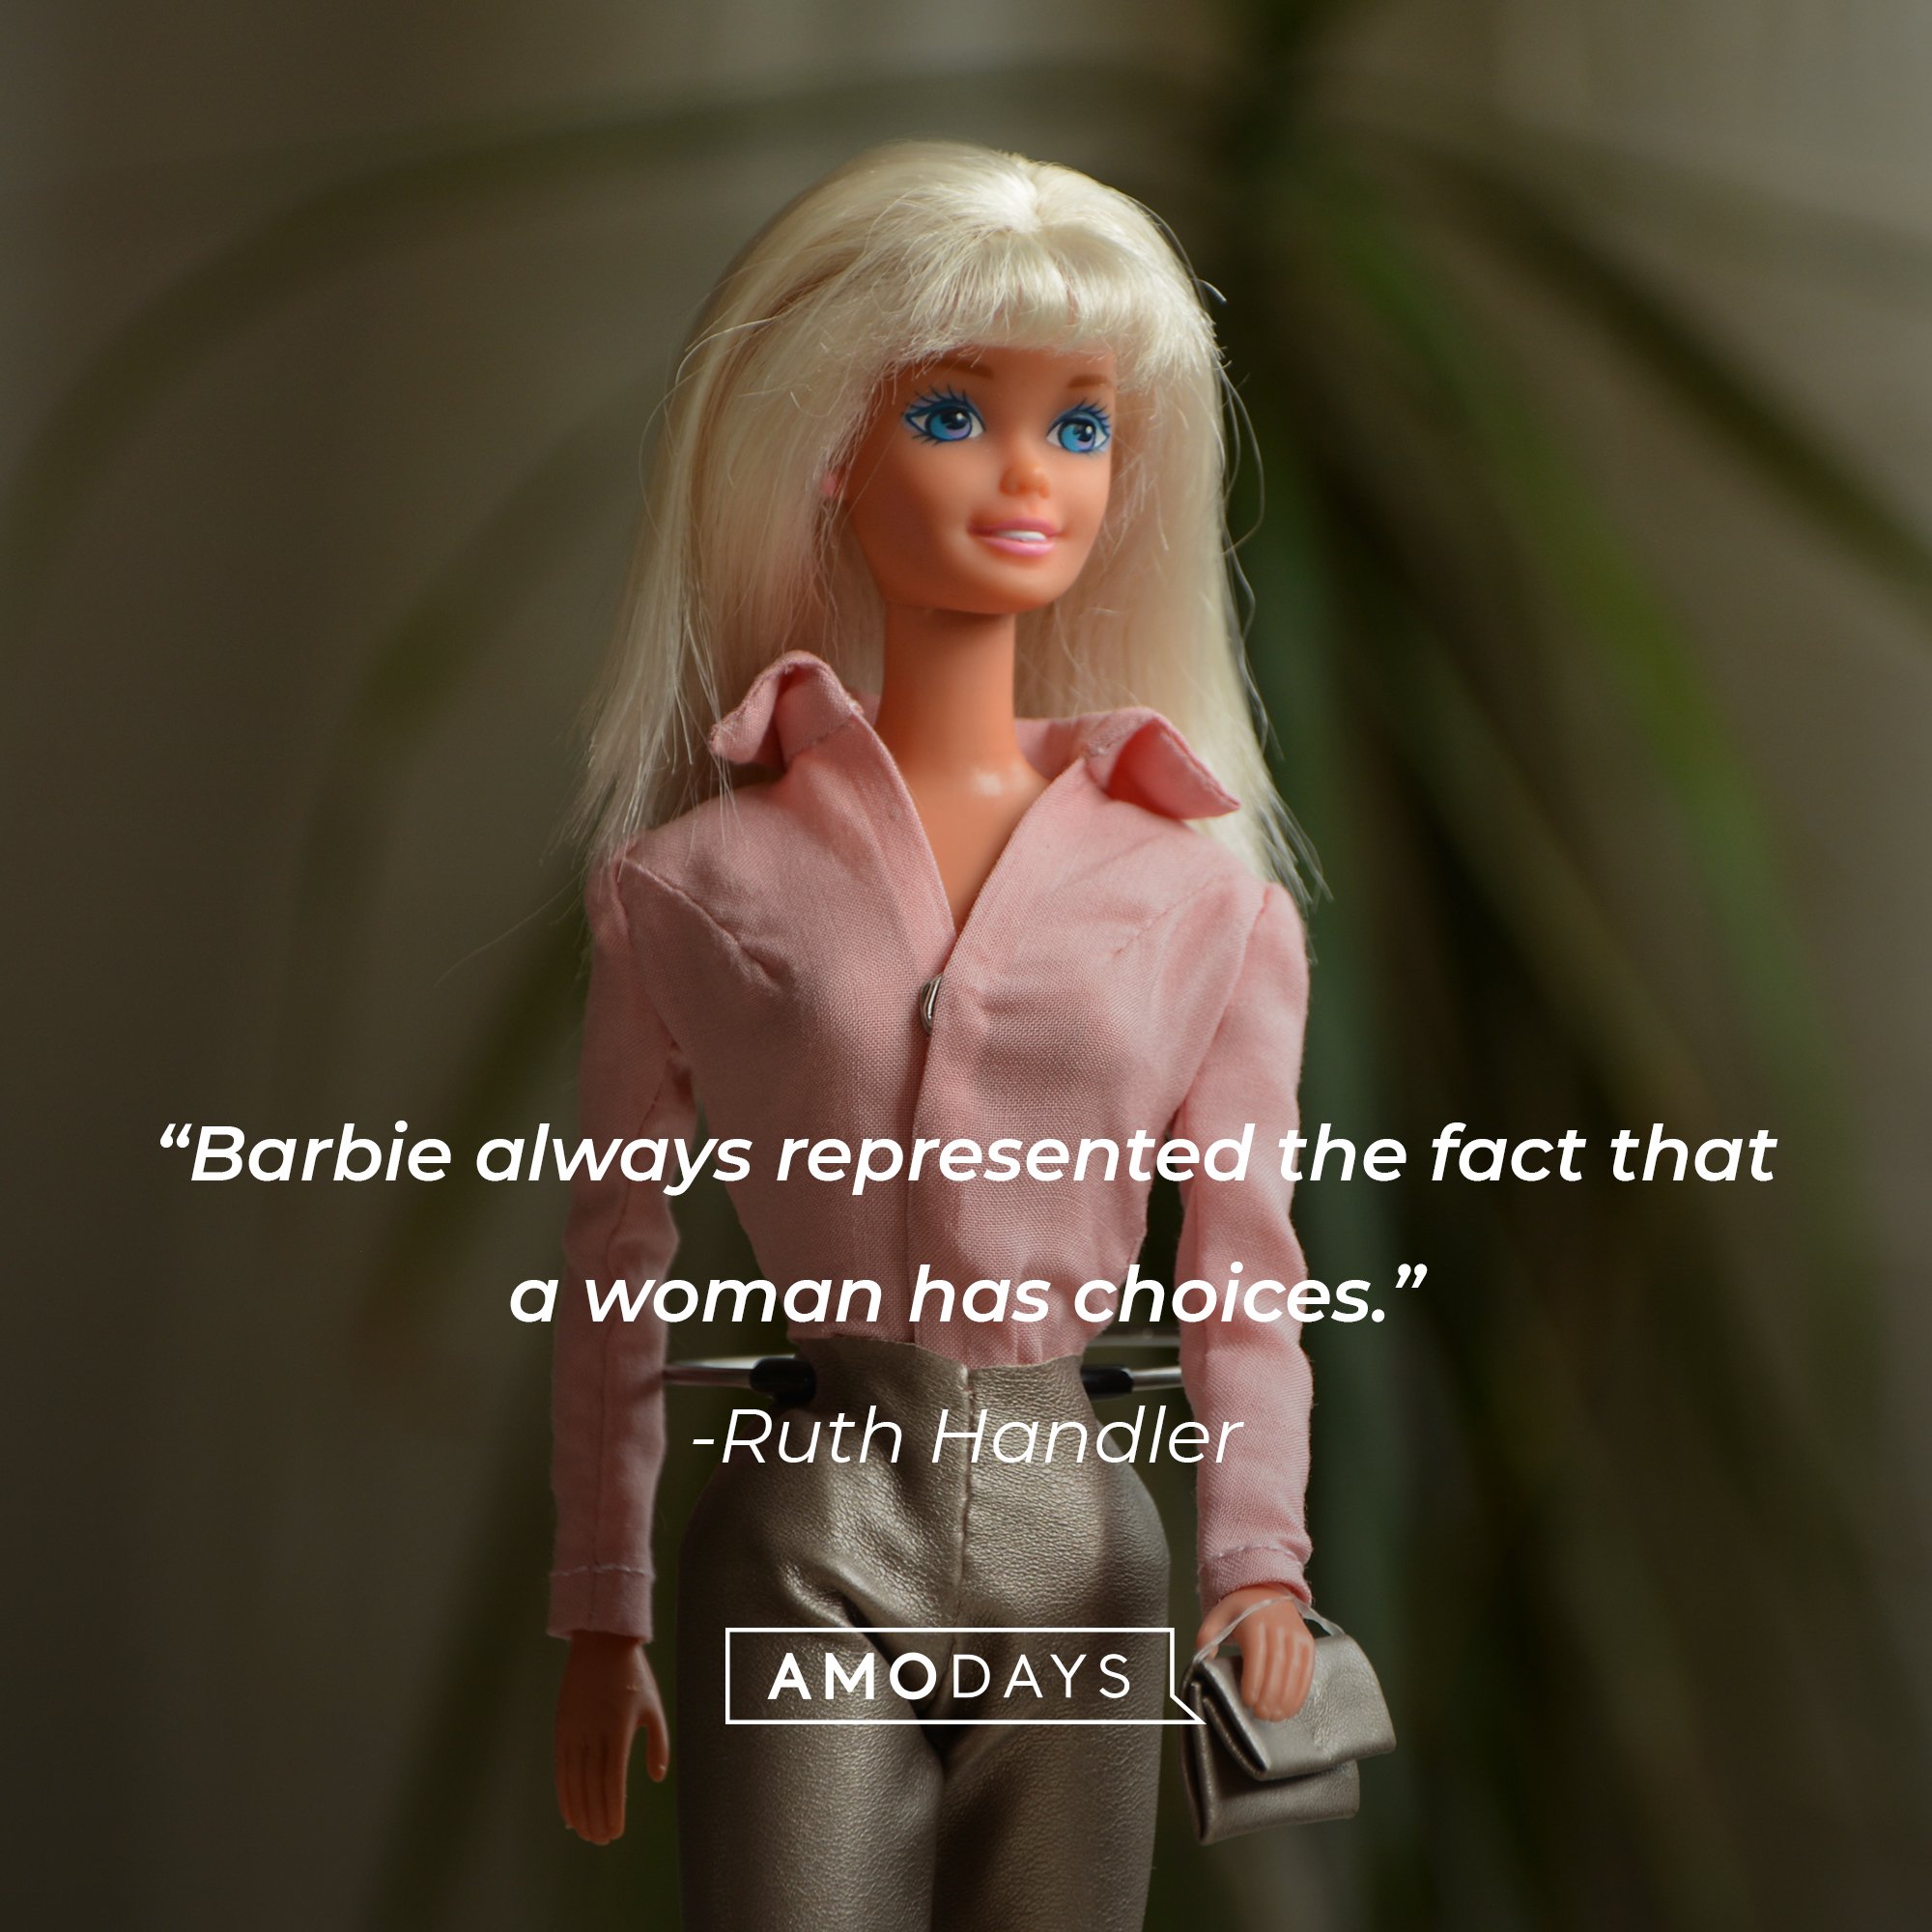 Ruth Handler's quote: "Barbie always represented the fact that a woman has choices." | Image: AmoDays